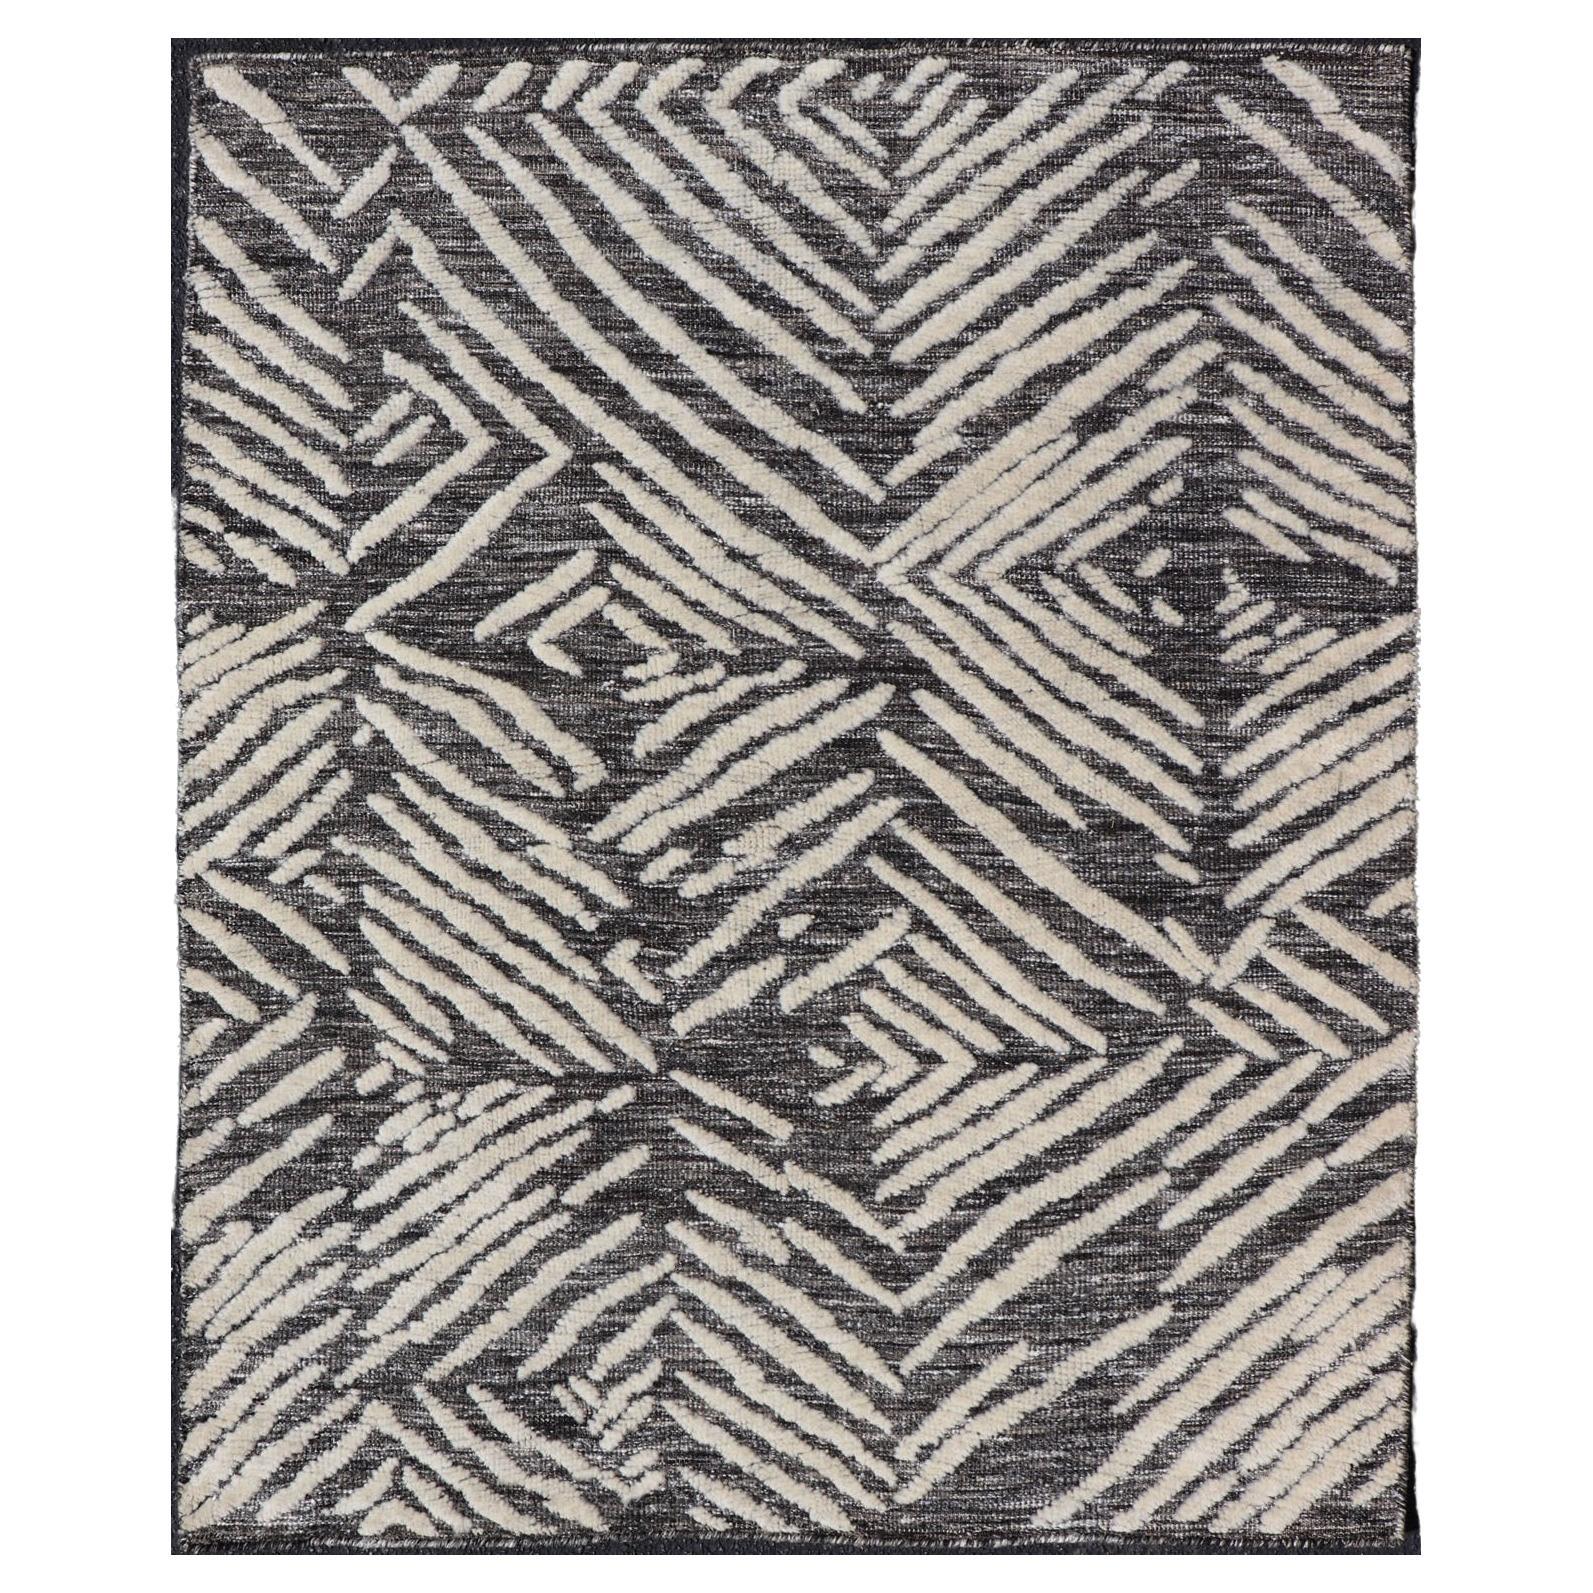 Small Modern Rug with Contemporary Stripes Pattern on Dark Background